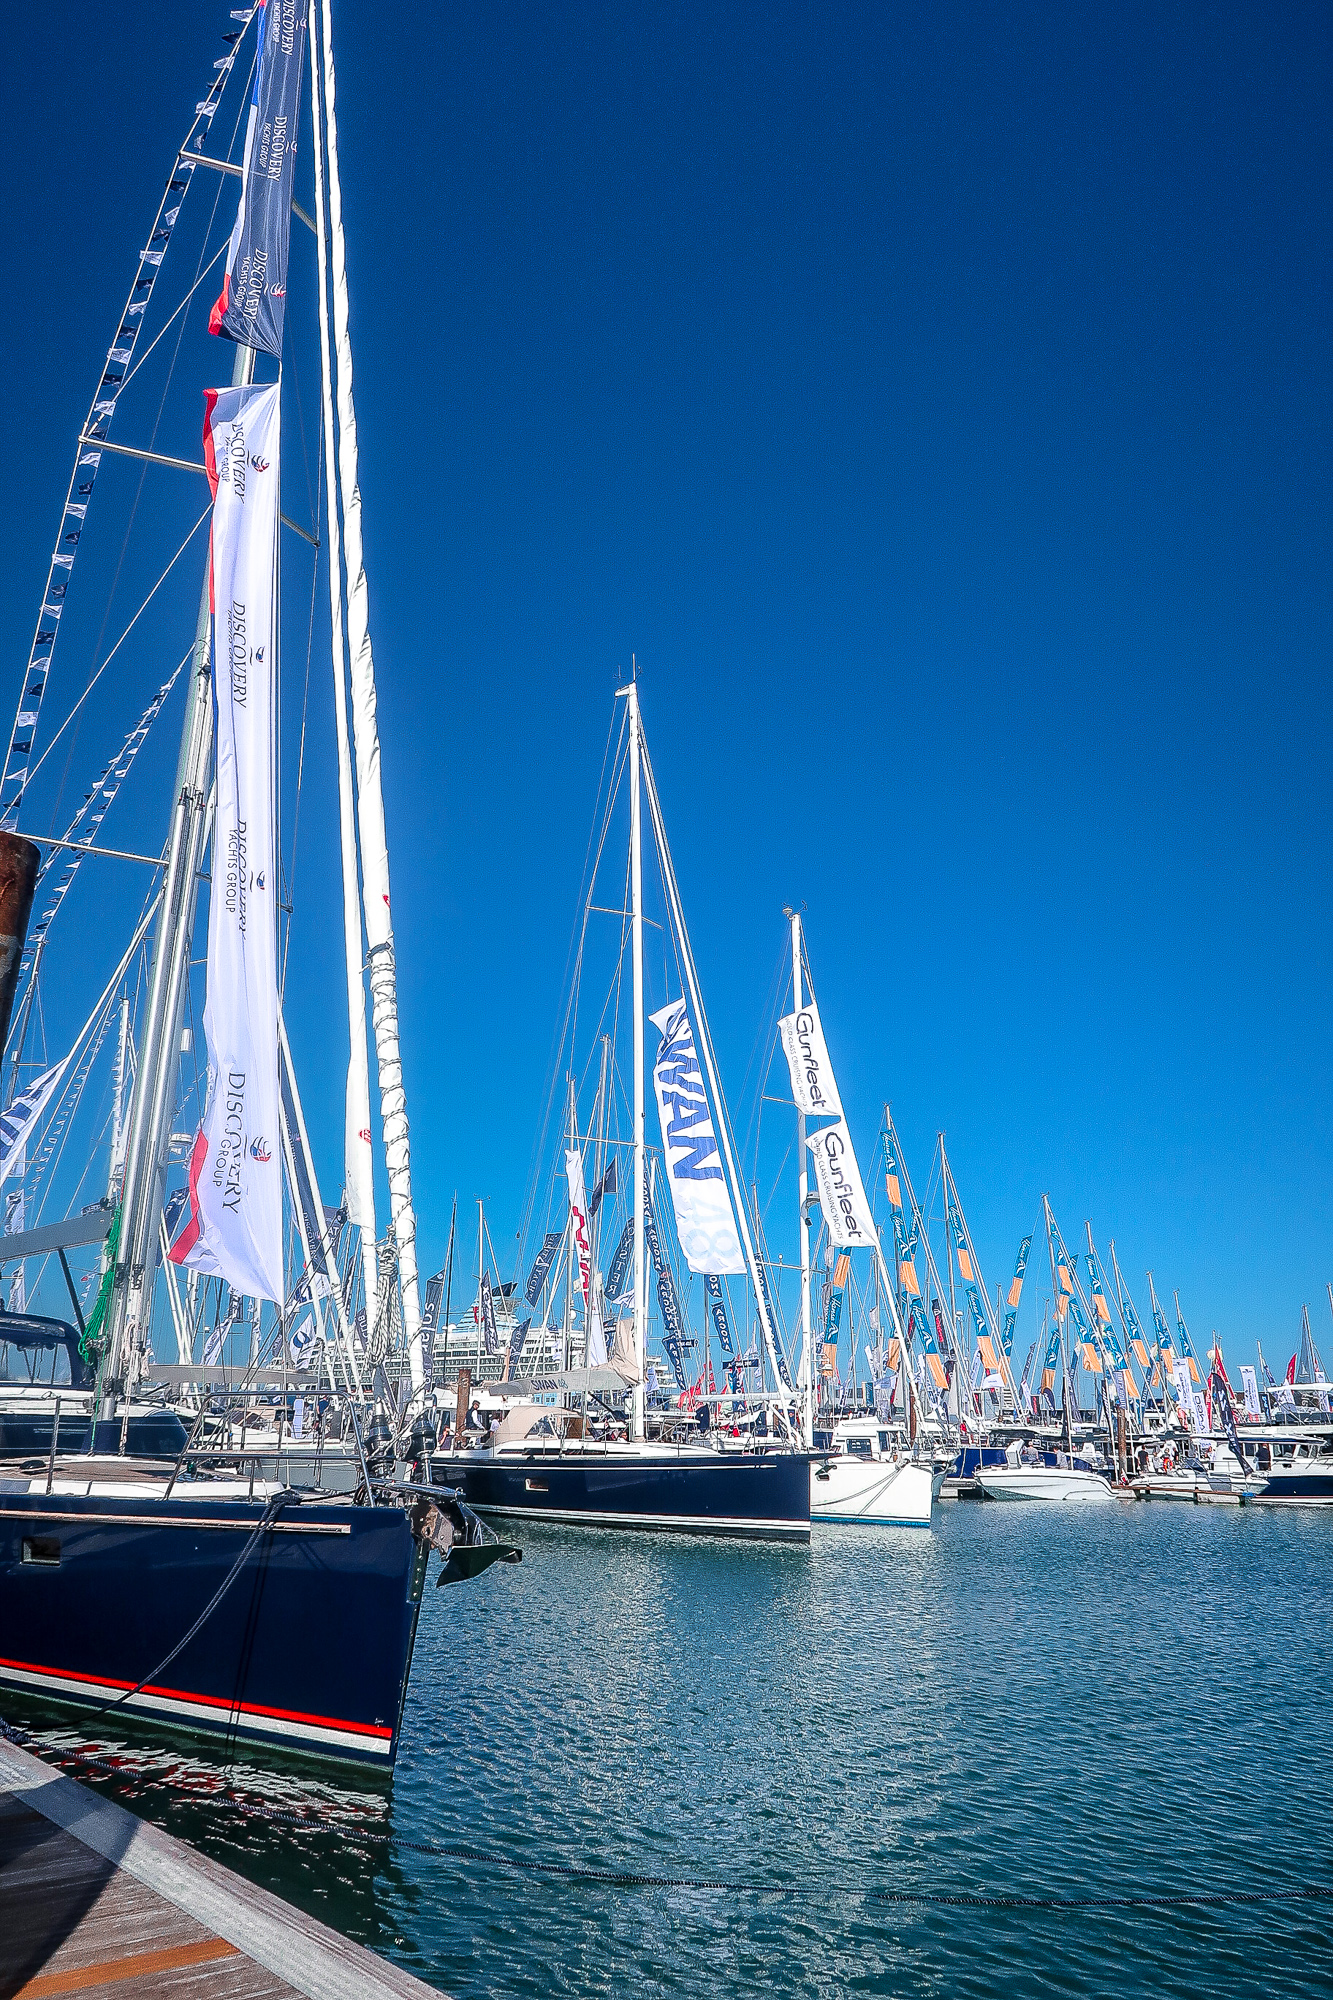 Southampton Boat Show: How To Get Discounted Tickets 27